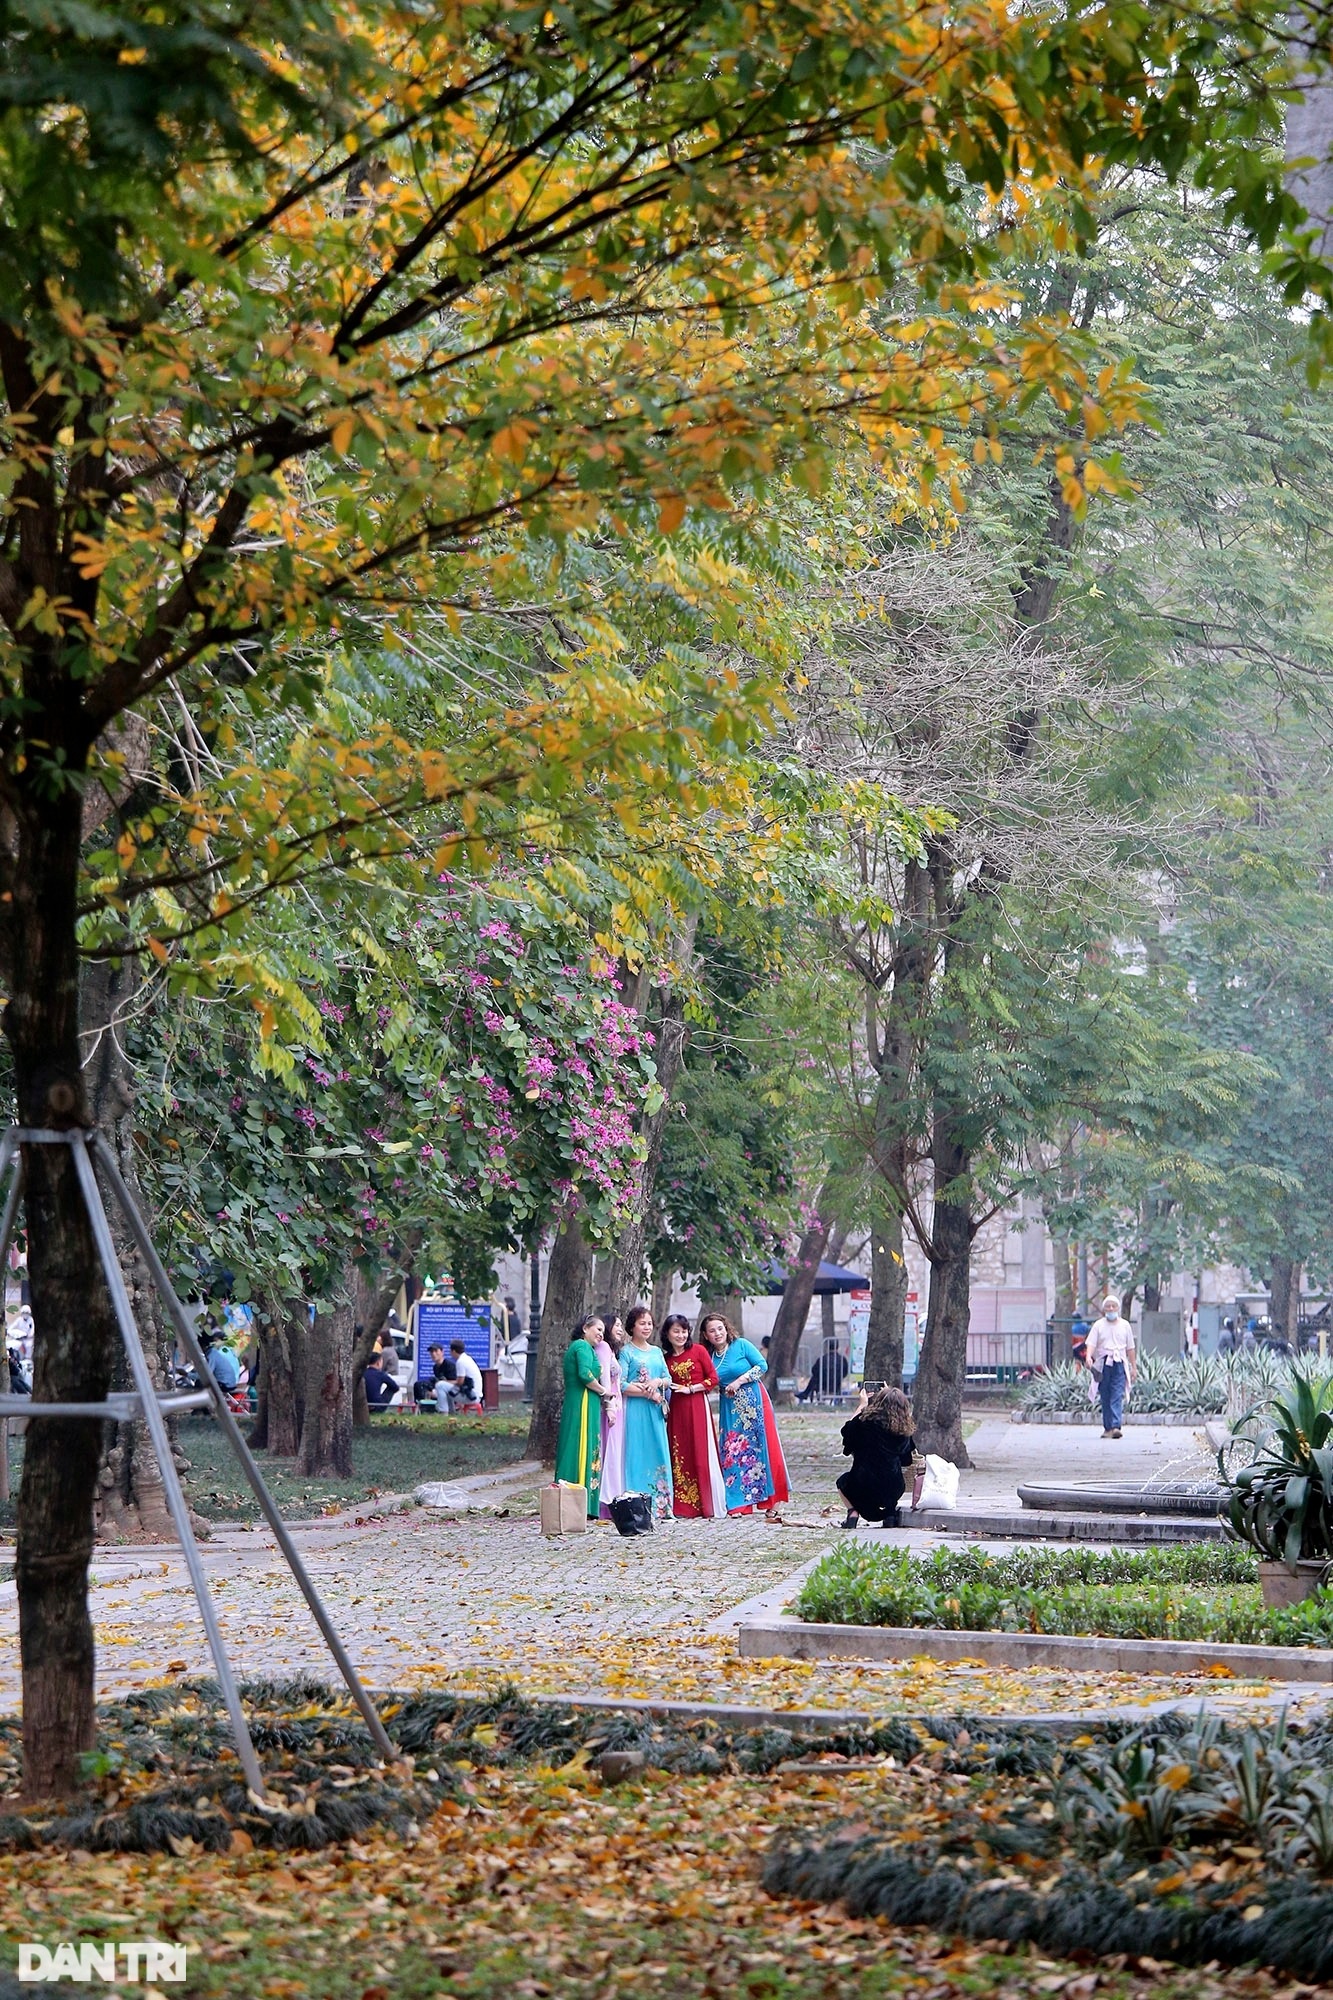 Hanoi is golden in the season when the trees change leaves, young people flock to take pictures - 9